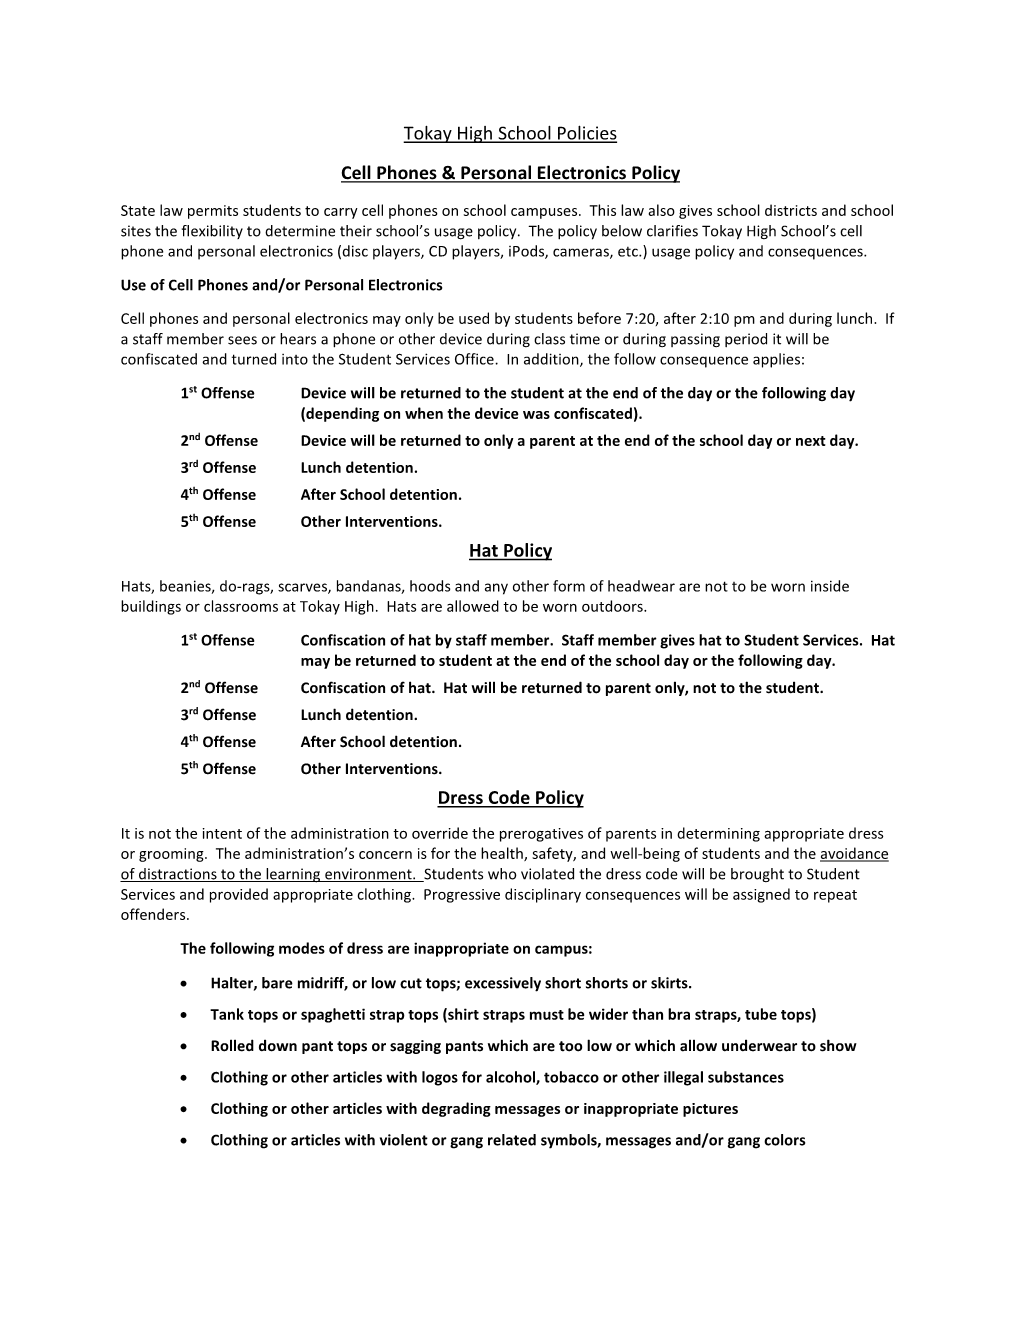 Tokay High School Policies Cell Phones & Personal Electronics